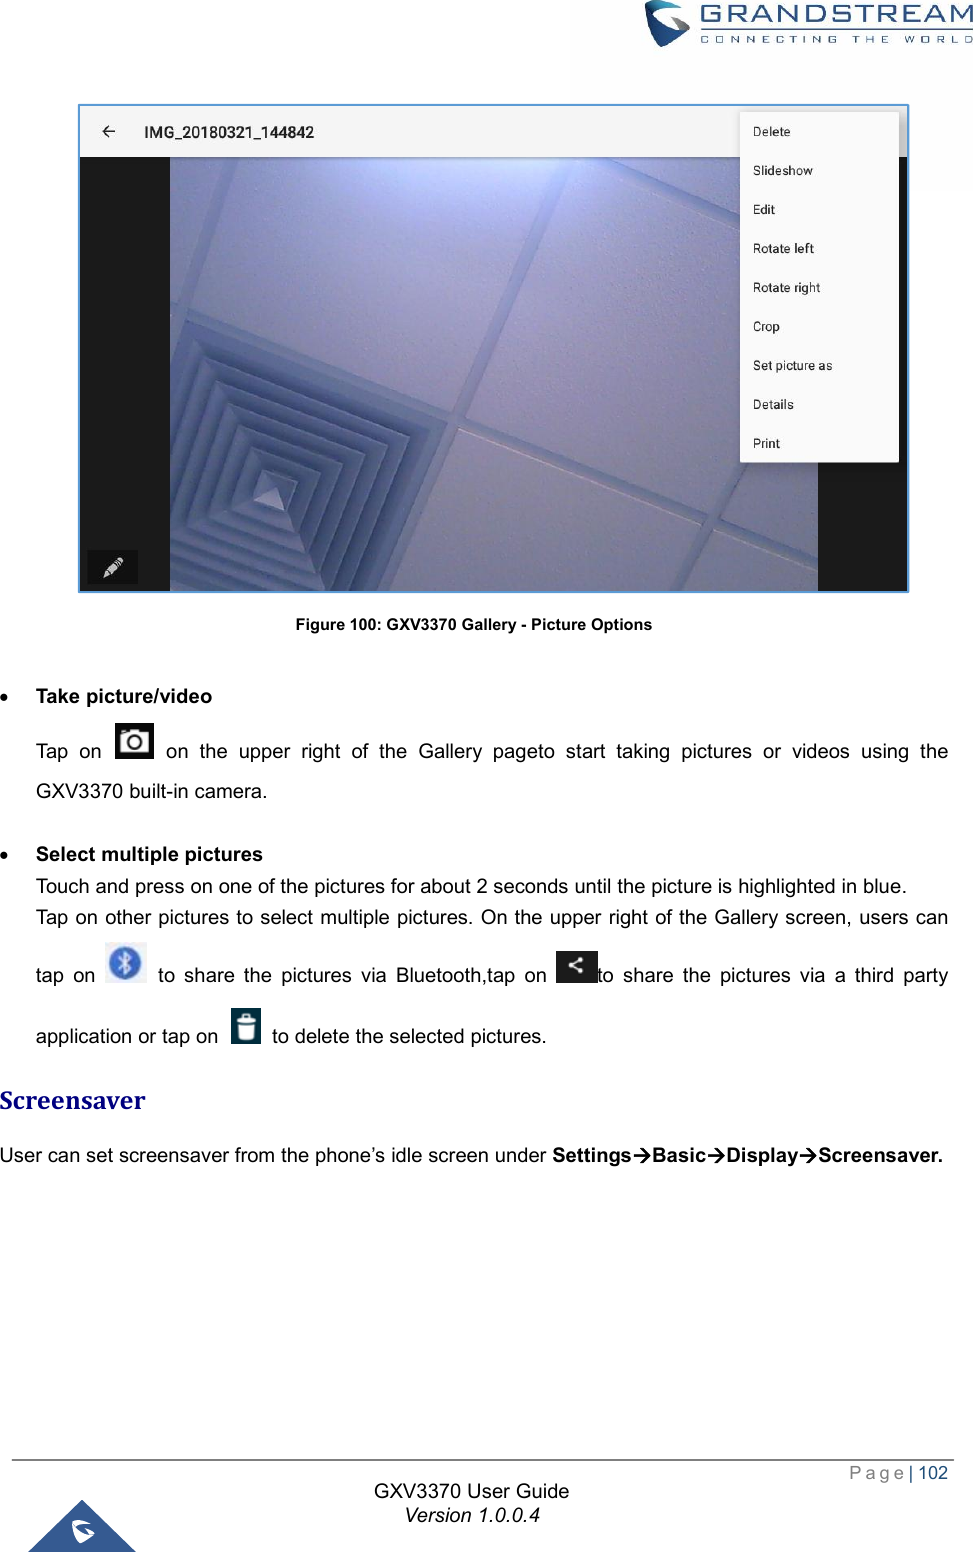  Page| 102  GXV3370 User Guide Version 1.0.0.4   Figure 100: GXV3370 Gallery - Picture Options  · Take picture/video Tap on   on the upper right of the Gallery pageto start taking pictures or videos using the GXV3370 built-in camera.   · Select multiple pictures Touch and press on one of the pictures for about 2 seconds until the picture is highlighted in blue.  Tap on other pictures to select multiple pictures. On the upper right of the Gallery screen, users can tap on   to share the pictures via Bluetooth,tap on  to share the pictures via a third party application or tap on   to delete the selected pictures. Screensaver User can set screensaver from the phone’s idle screen under SettingsàBasicàDisplayàScreensaver. 